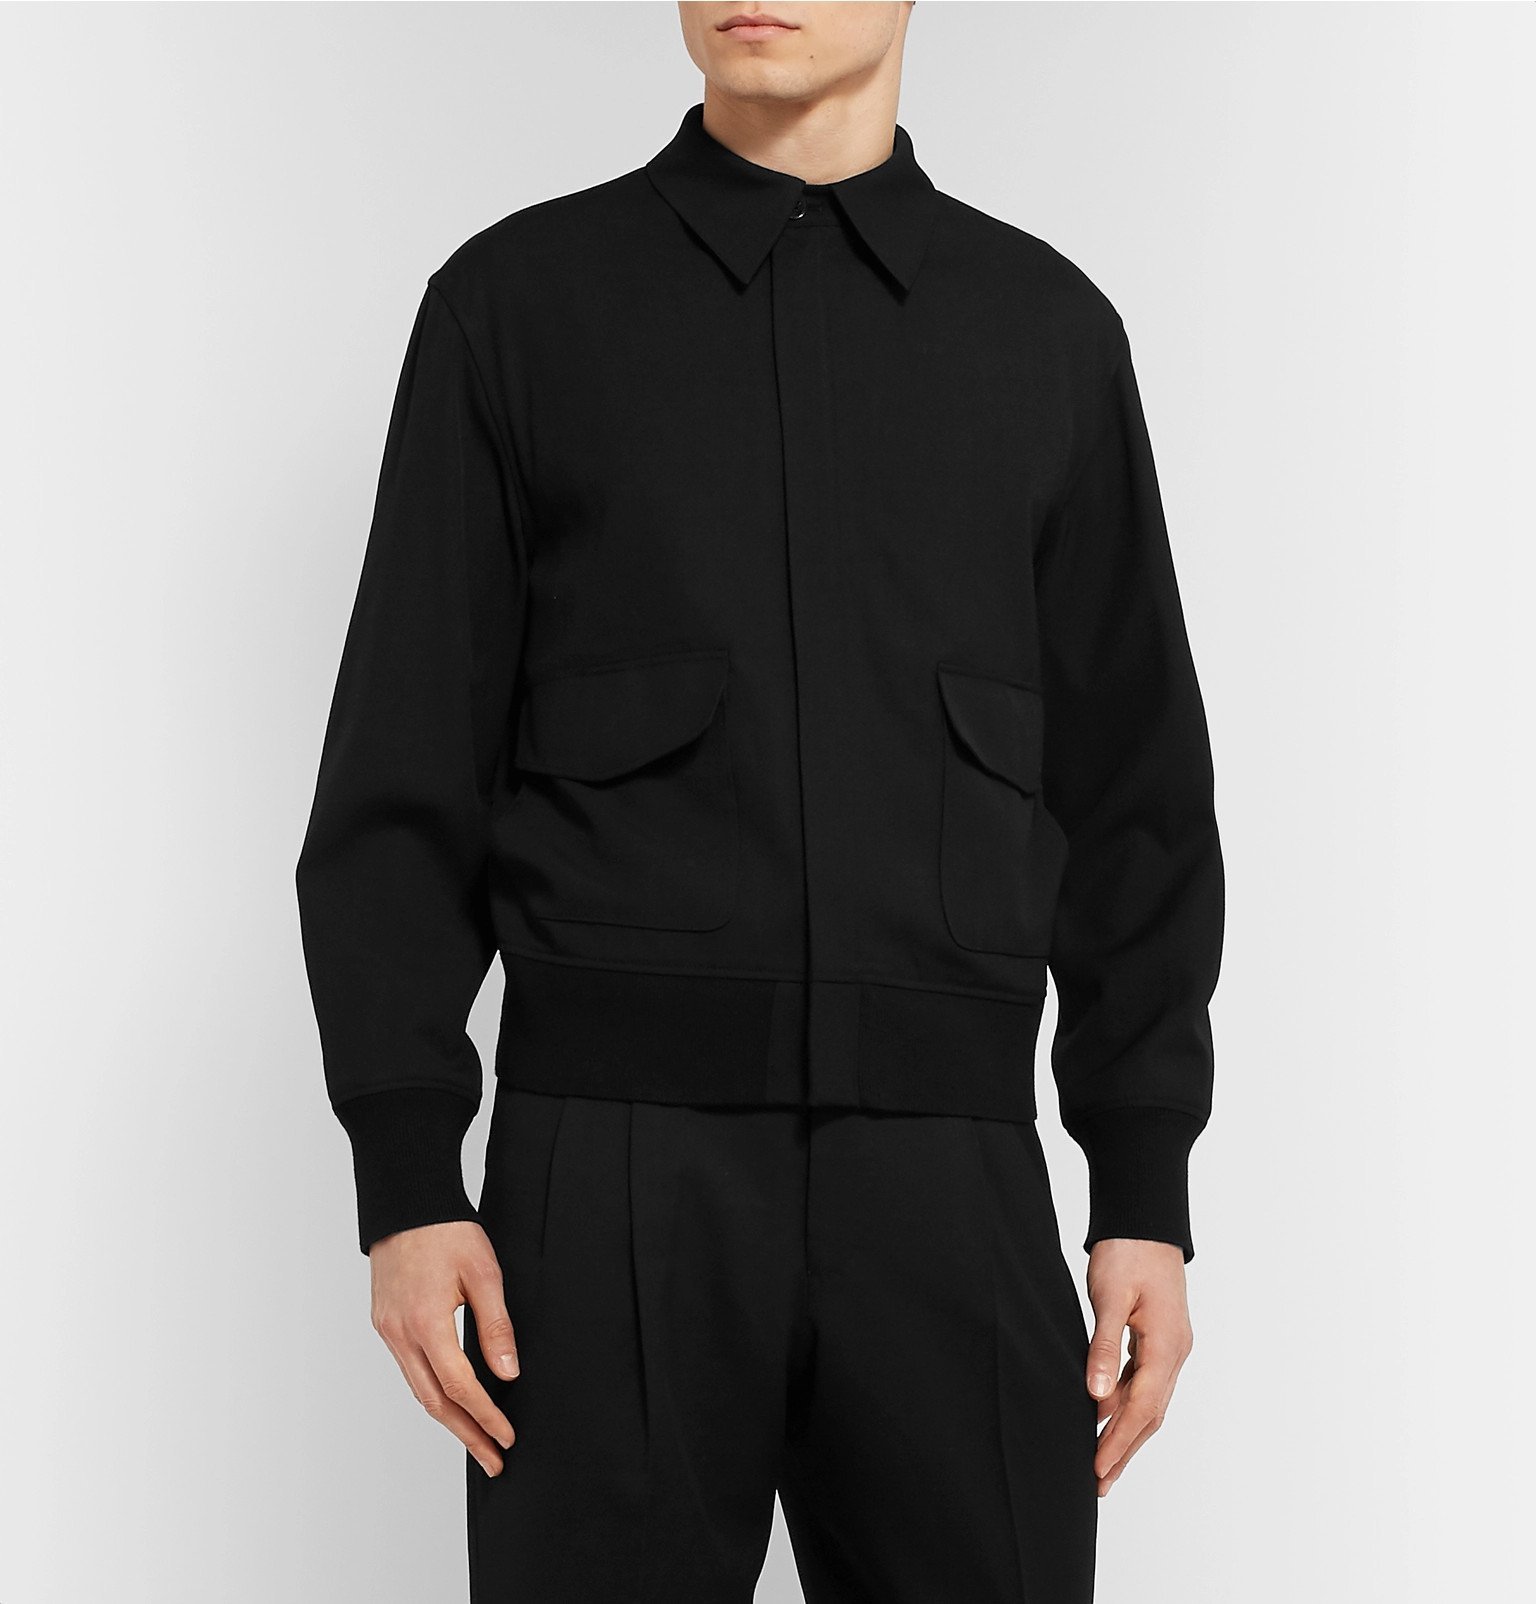 The Row - Wes Virgin Wool-Blend Twill Bomber Jacket - Black The Row